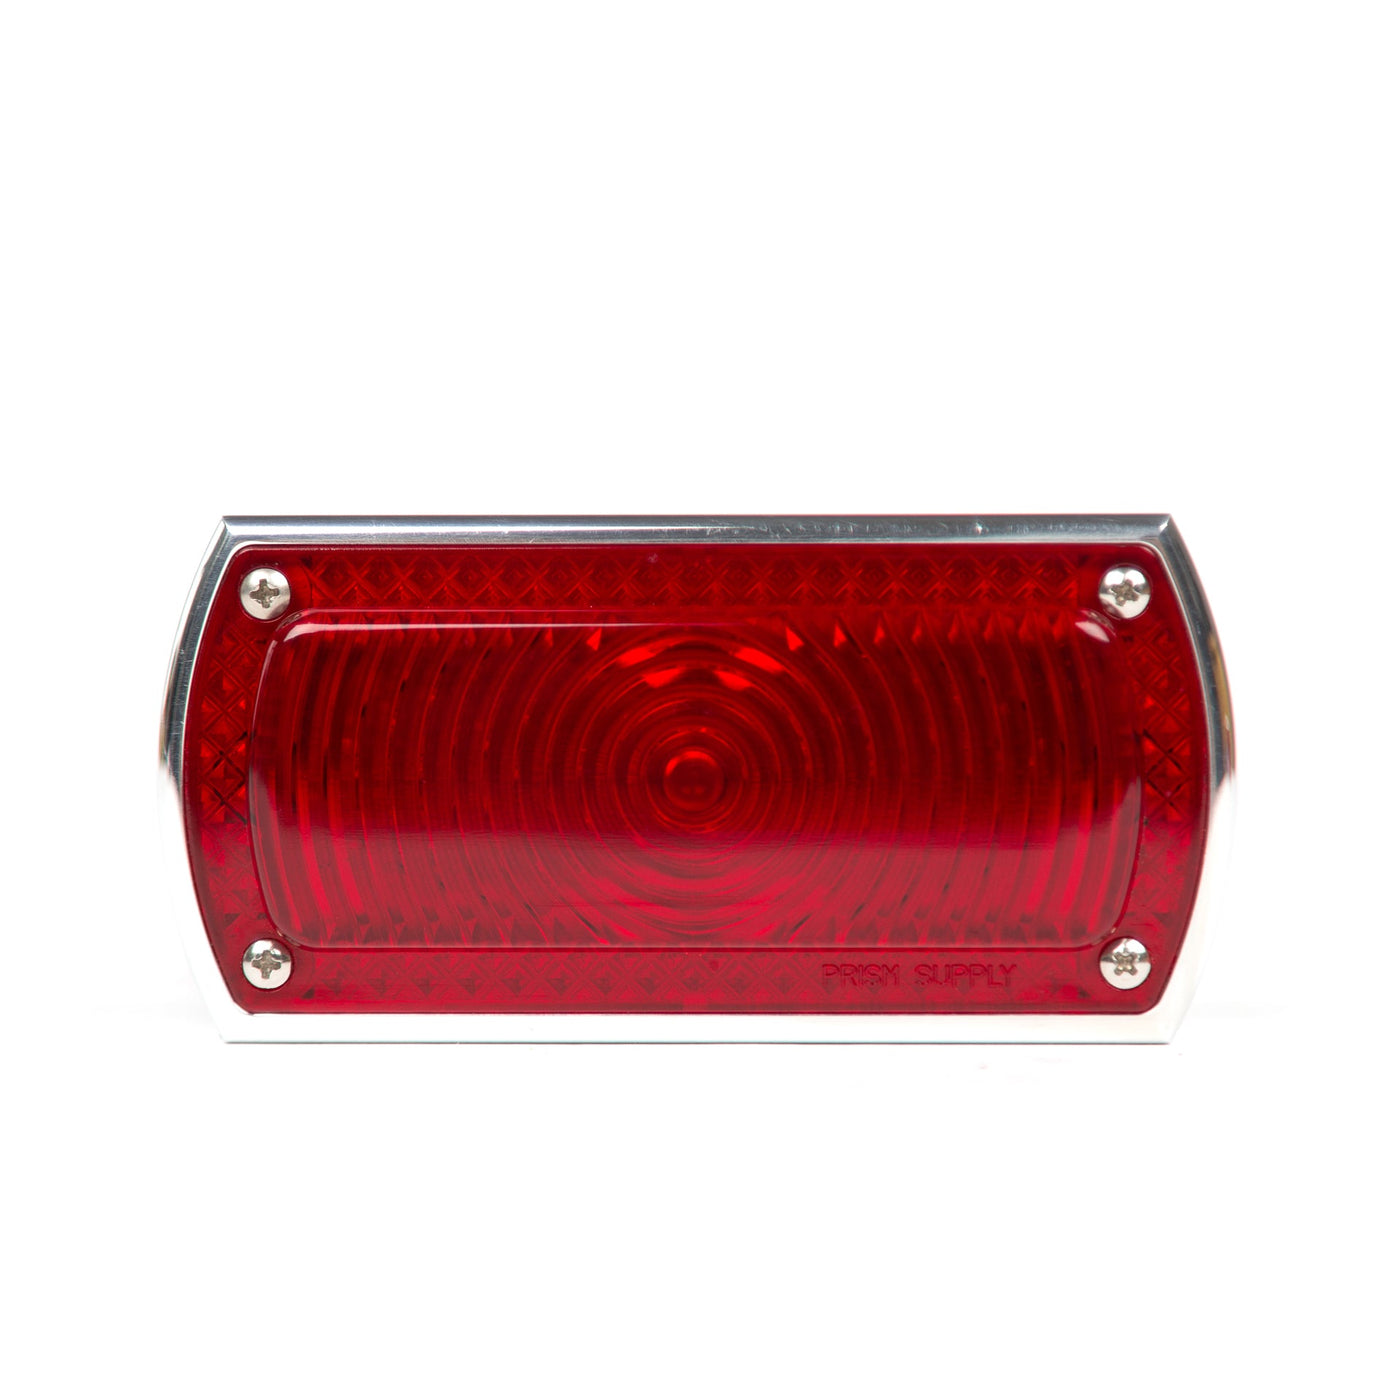 Taillight »Box Chopper« by Prism Supply Co.